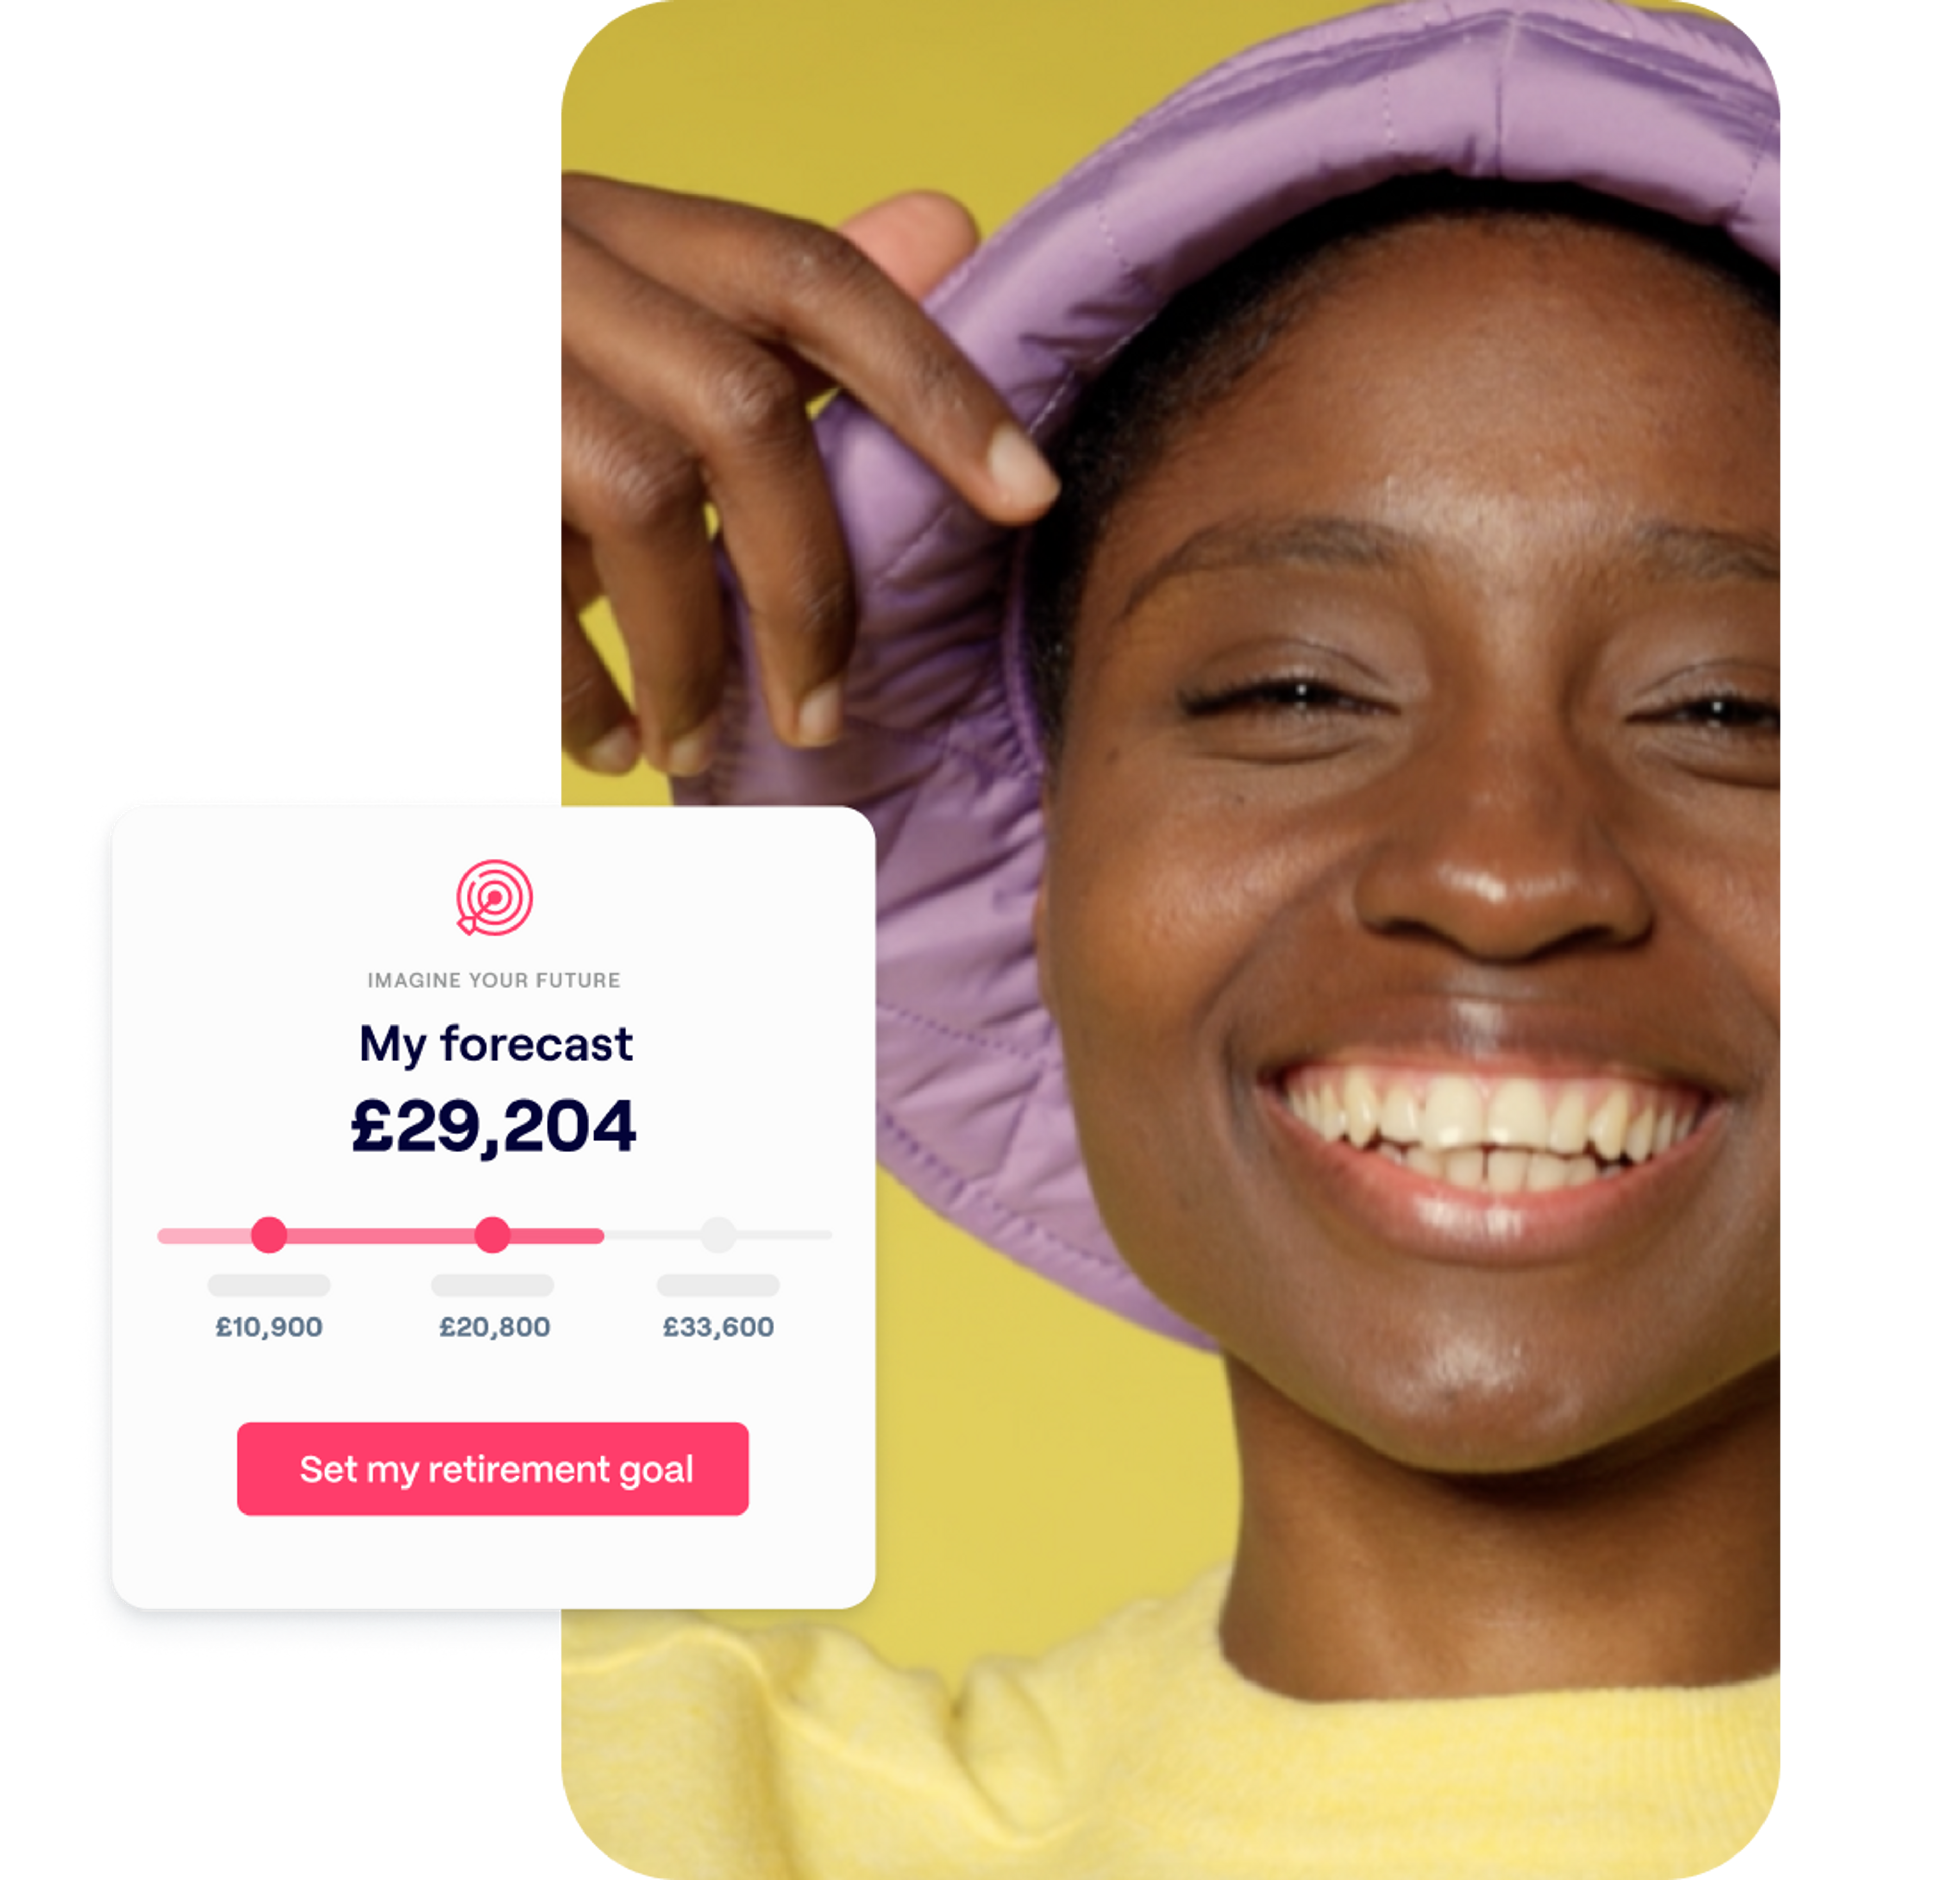 A photo of a woman smiling and an excerpt of the Penfold pension app showing forecasted retirement savings